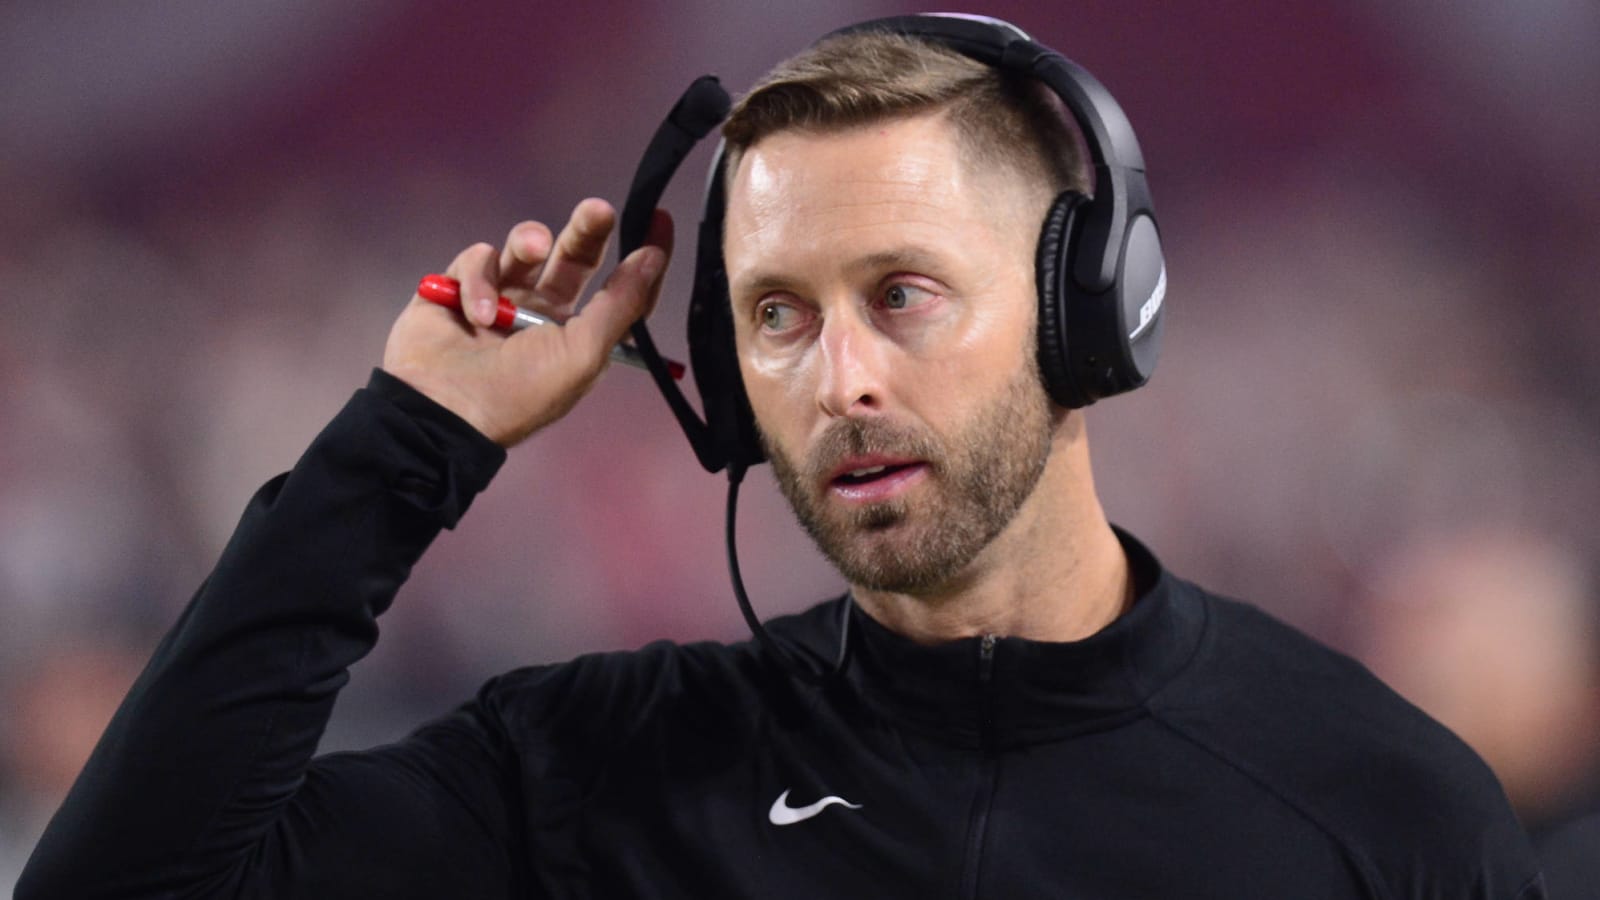 Kliff Kingsbury has good reason for being ‘triggered’ by AT&T Stadium